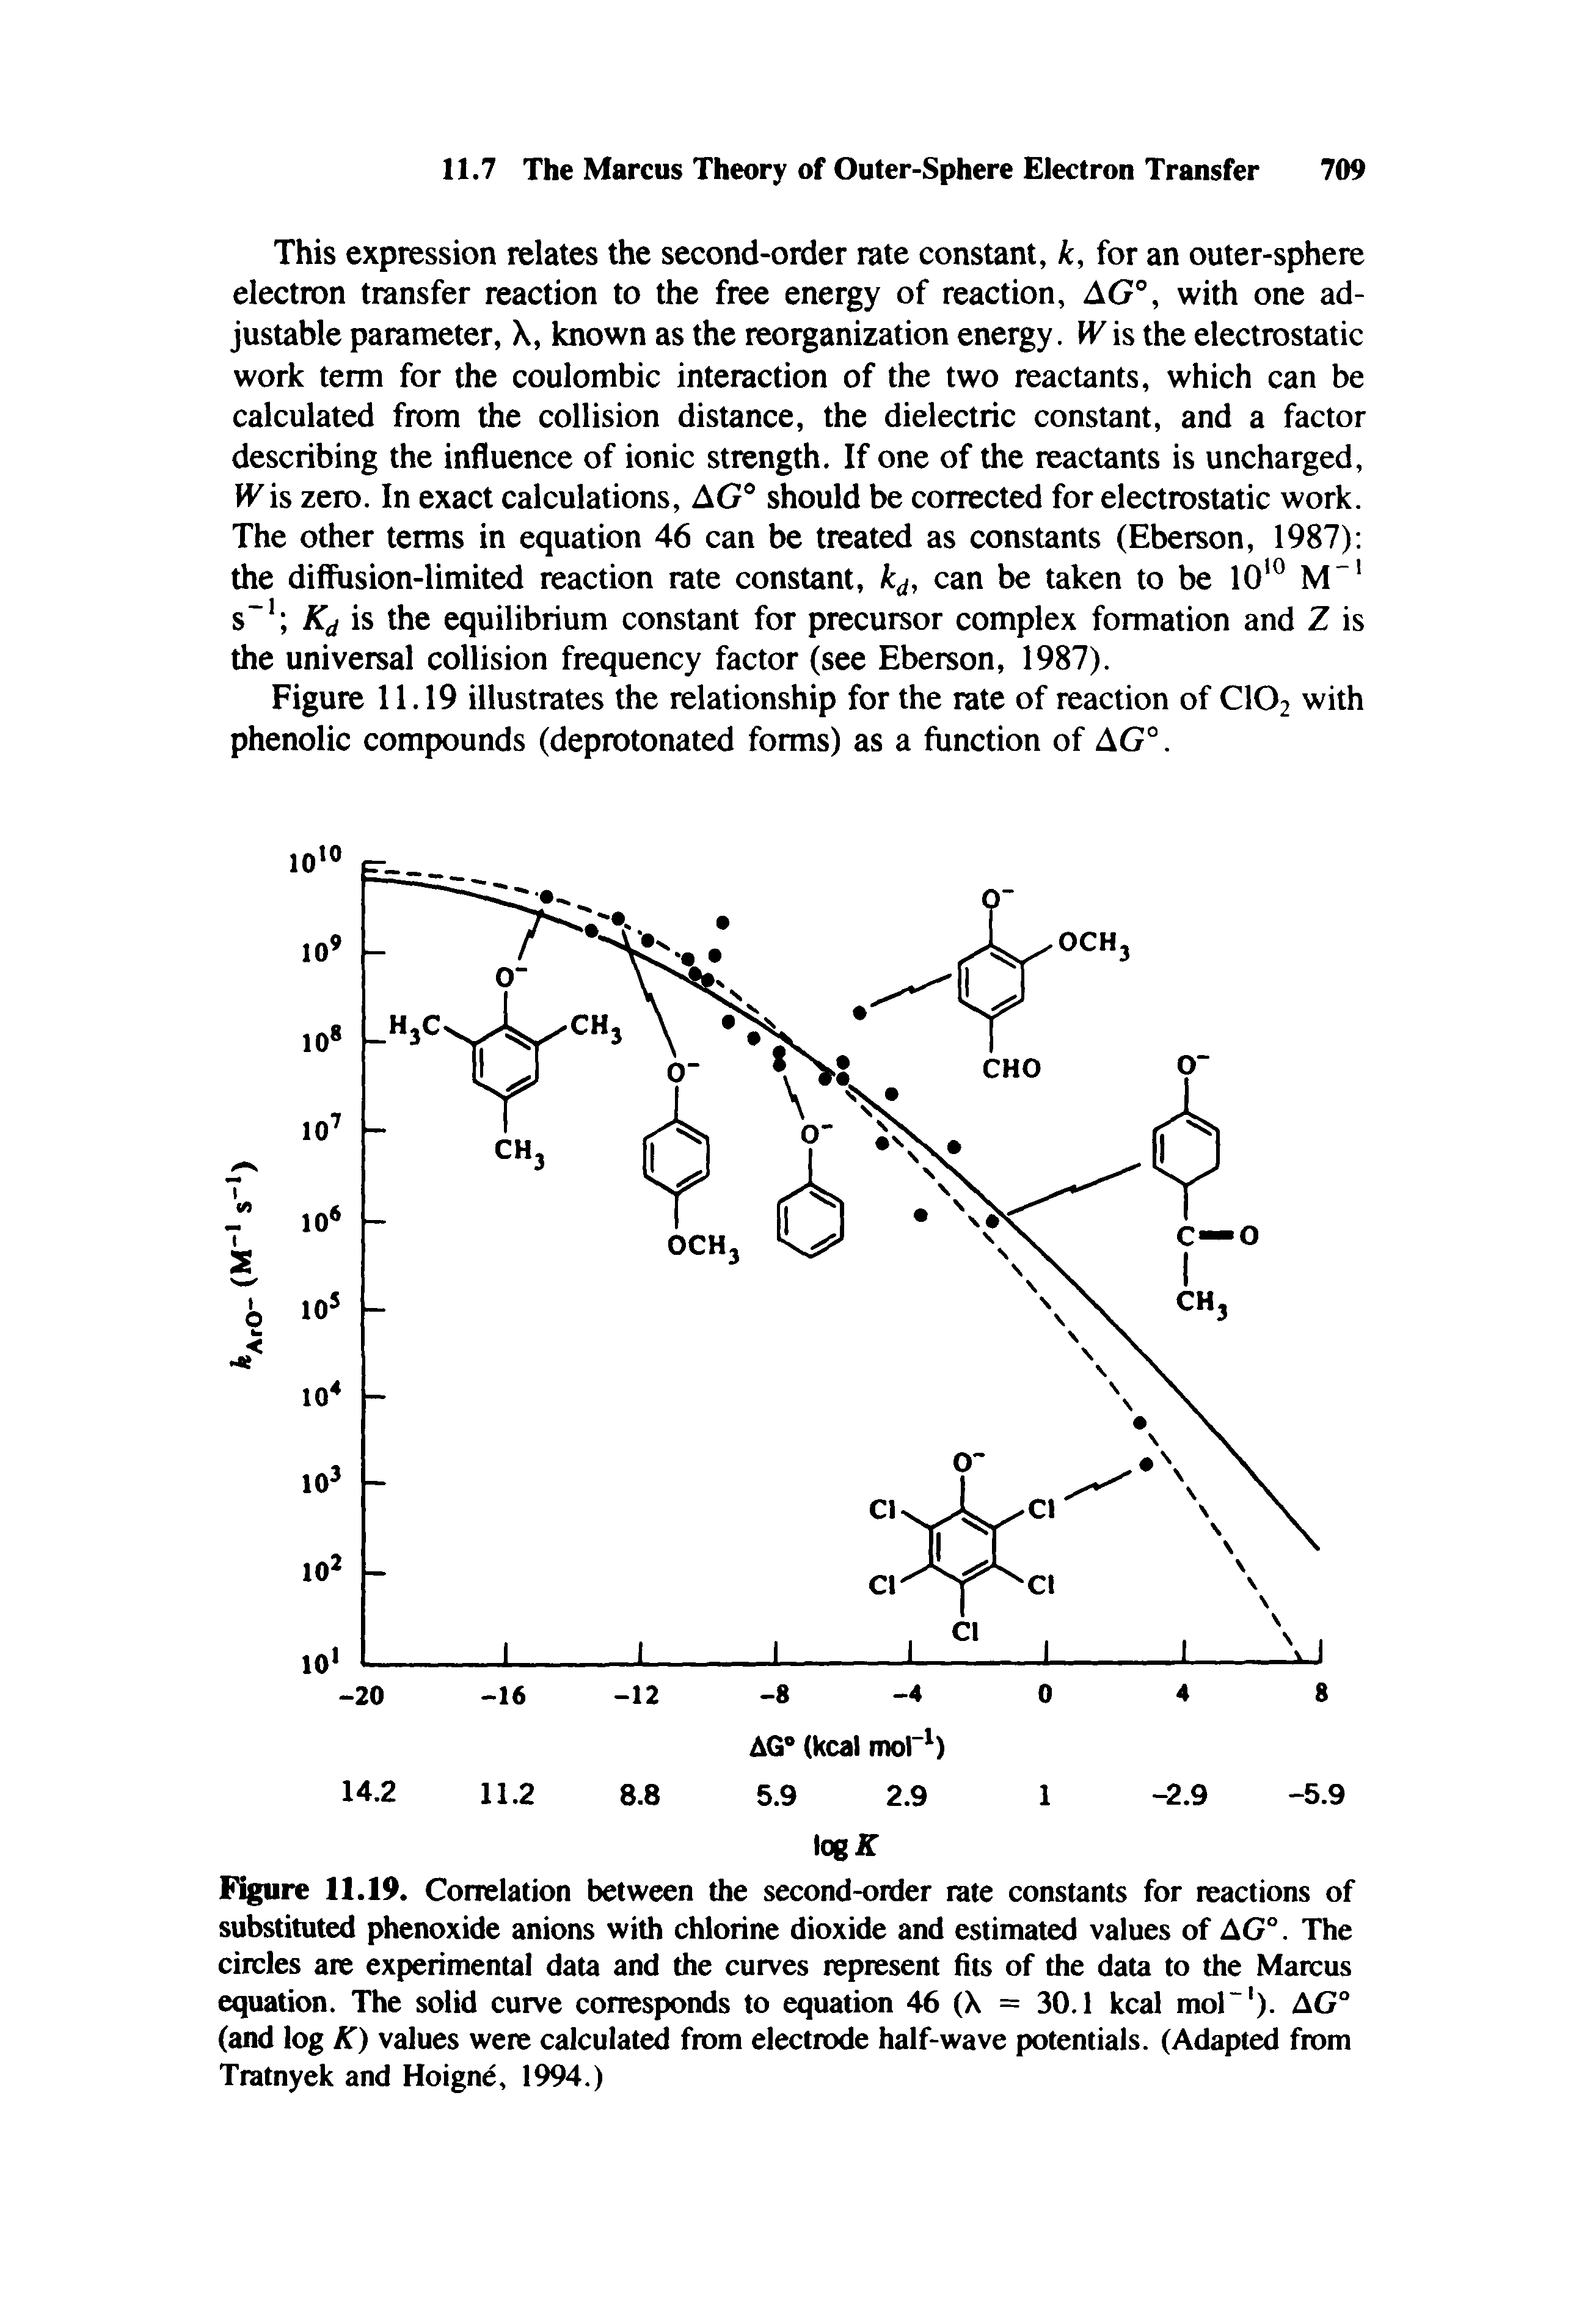 Figure 11.19. Correlation between the second-order rate constants for reactions of substituted phenoxide anions with chlorine dioxide and estimated values of AG°. The circles are experimental data and the curves represent fits of the data to the Marcus equation. The solid curve corresponds to equation 46 (X = 30.1 kcal moP ). AG° (and log K) values were calculated from electrode half-wave potentials. (Adapted from Tratnyek and Hoigne, 1994.)...